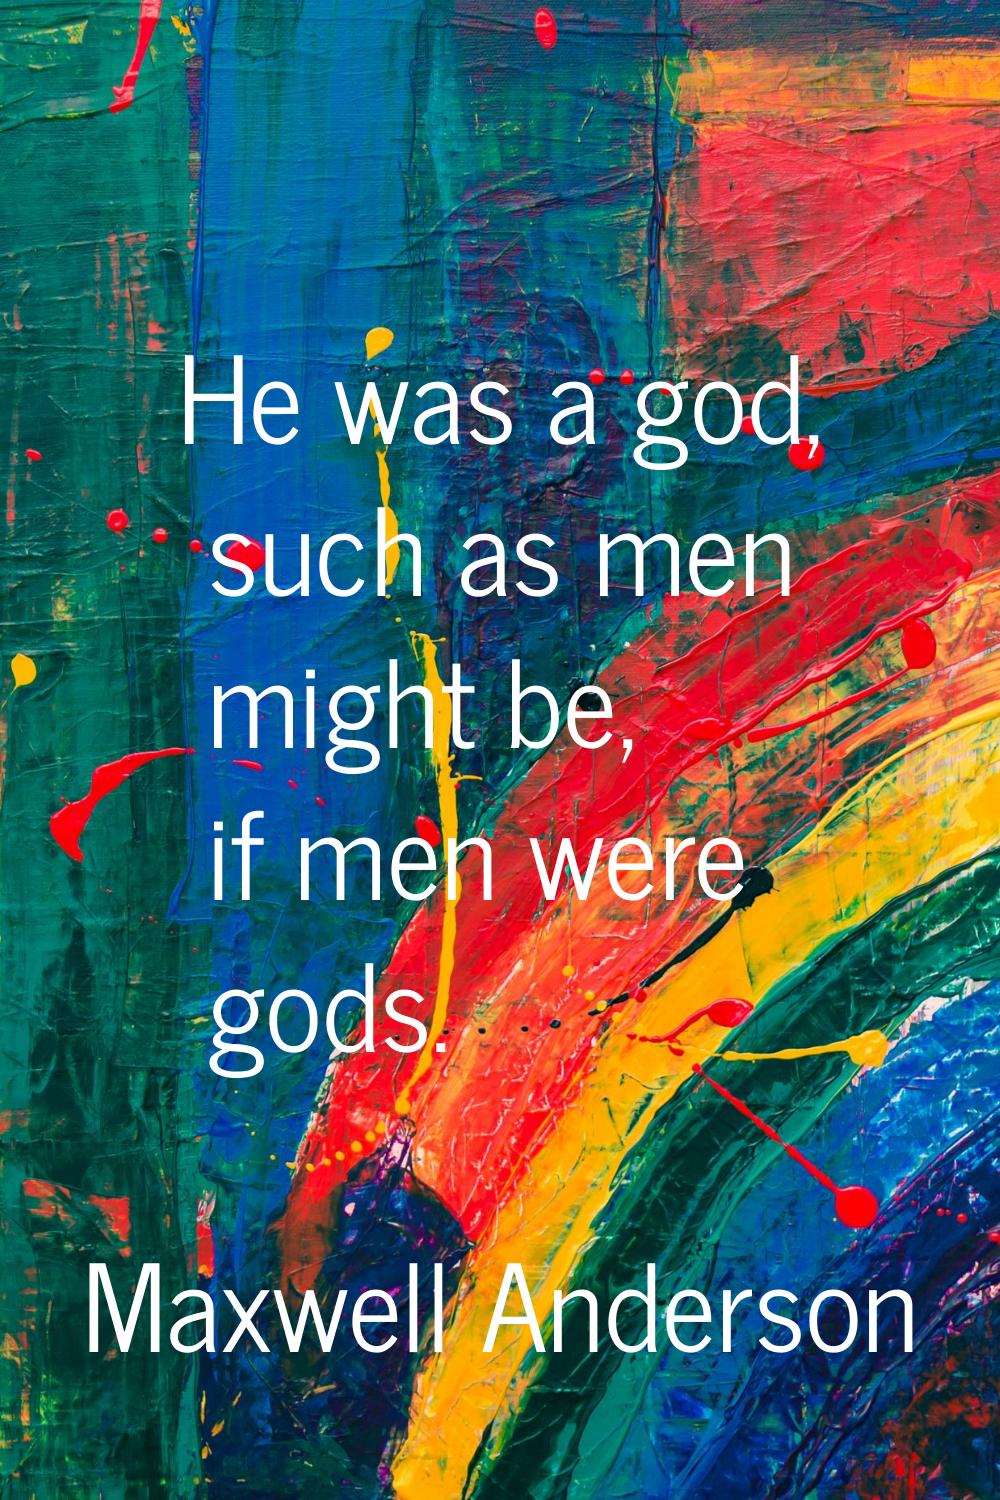 He was a god, such as men might be, if men were gods.